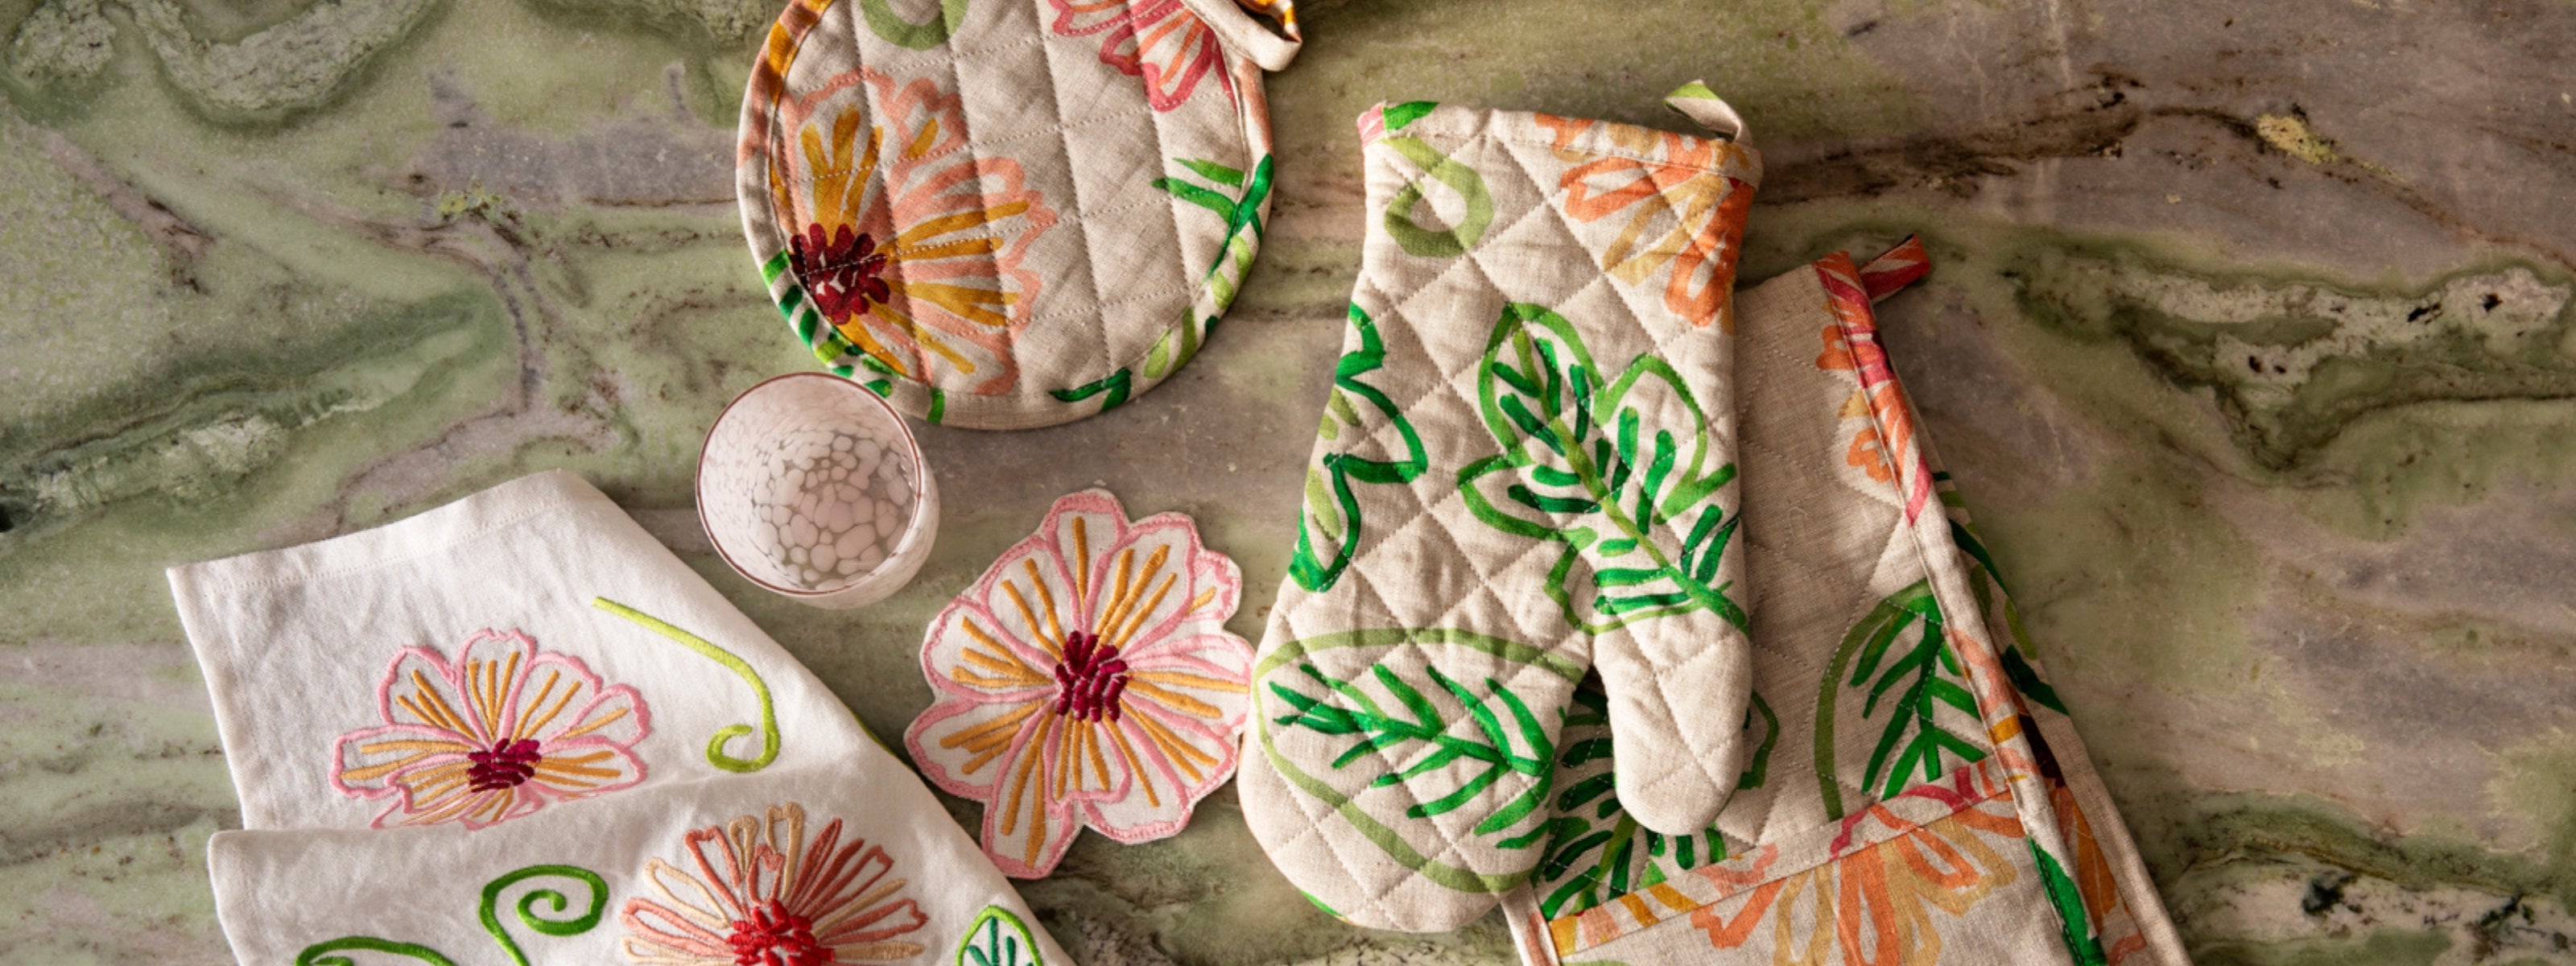 Kitchenware Products | Linen Napkins | Oven Mitts